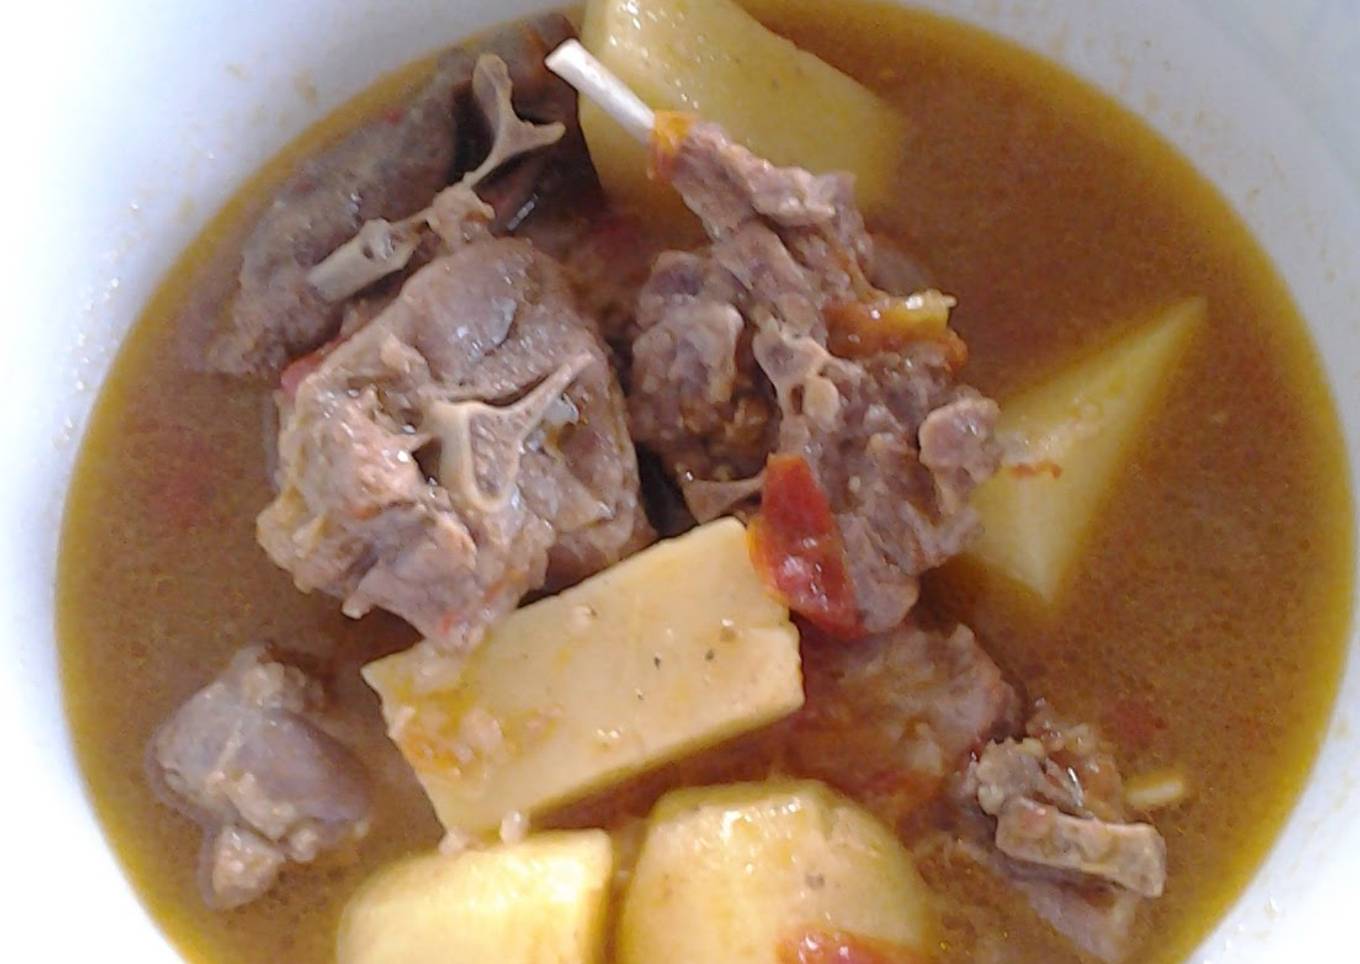 Beef and potato stew.